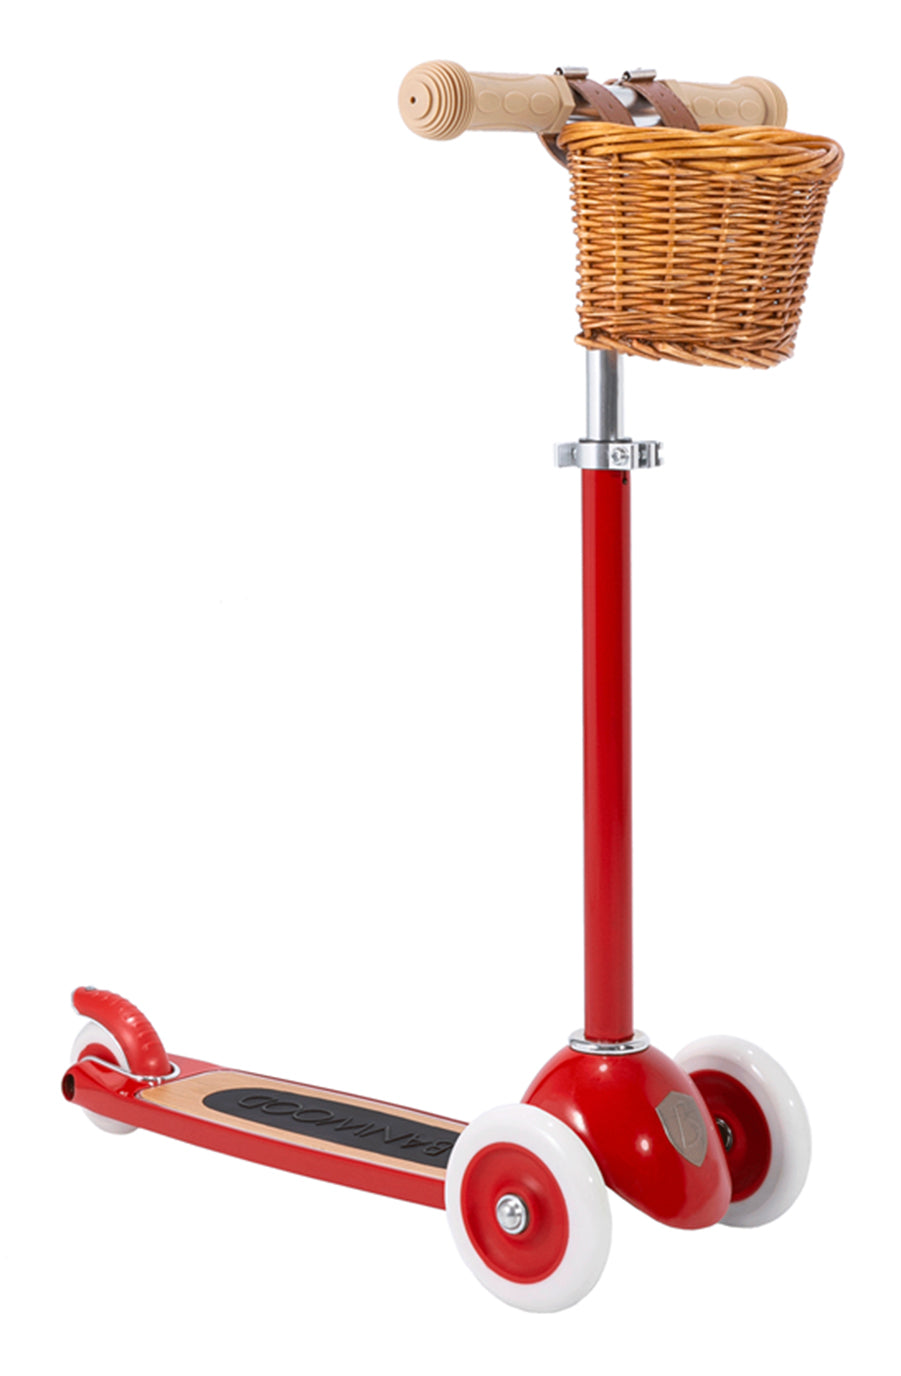 banwood-scooter-red.jpg